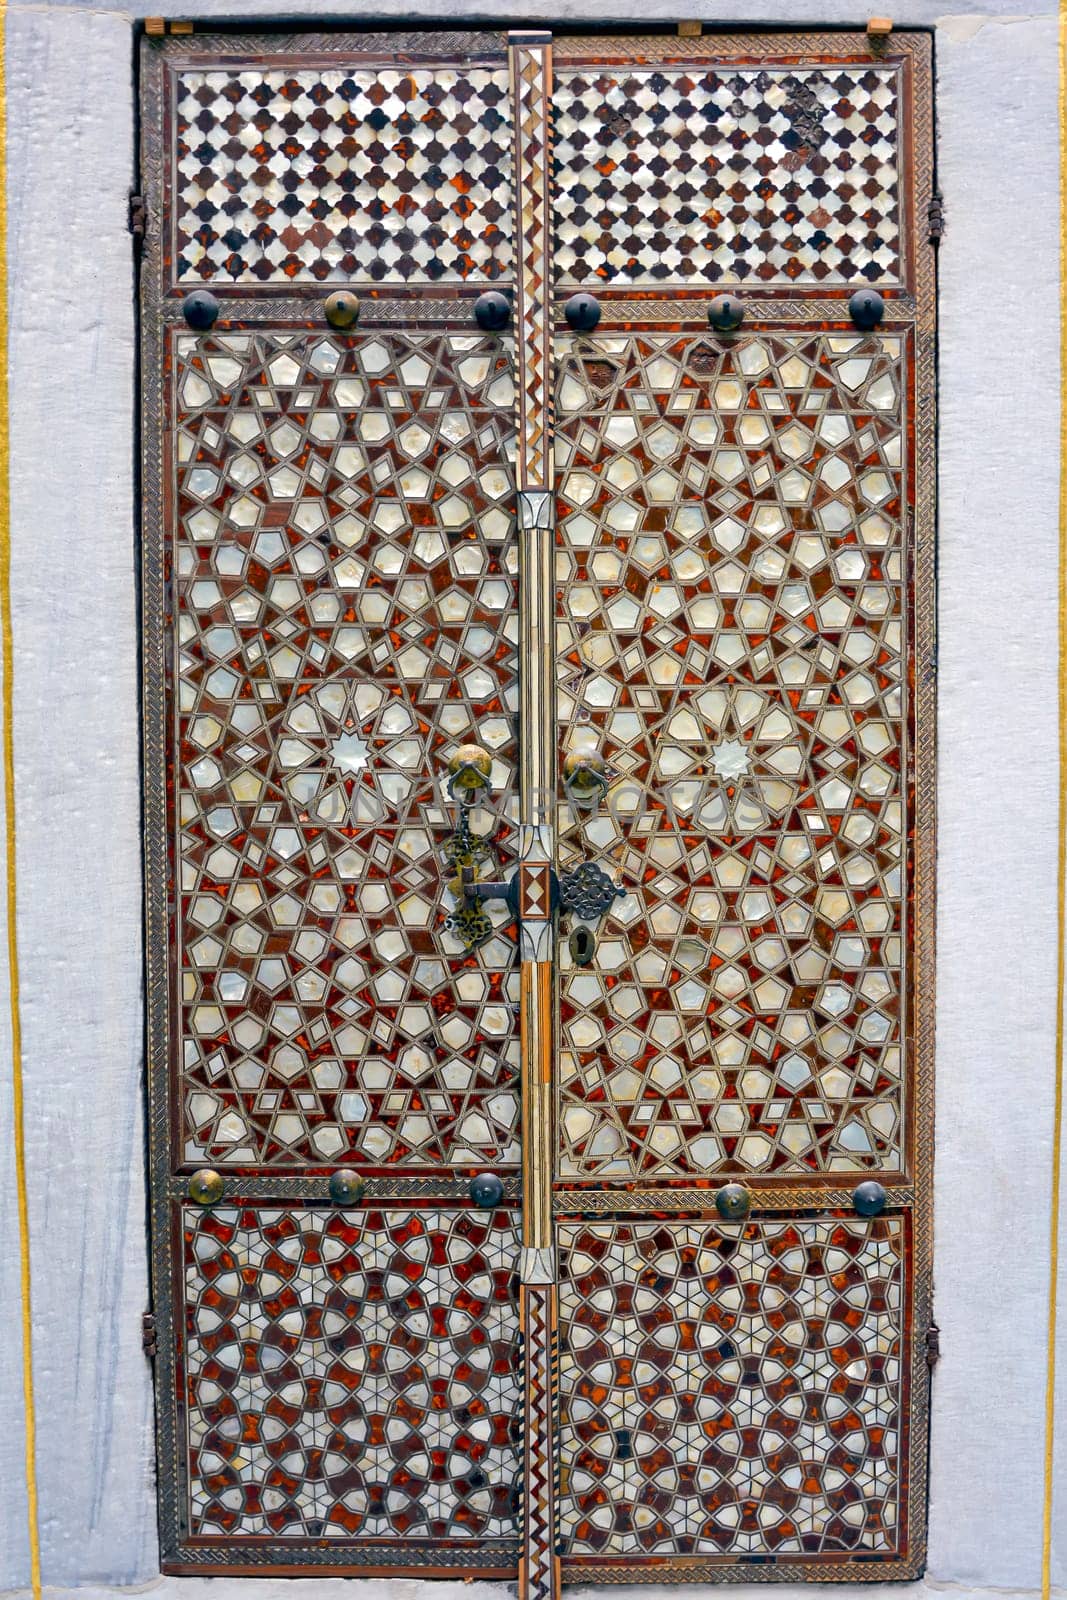 Portal with wood and mother-of-pearl mosaic inside the ancient and famous Topkapi Palace in Istanbul, Turkey